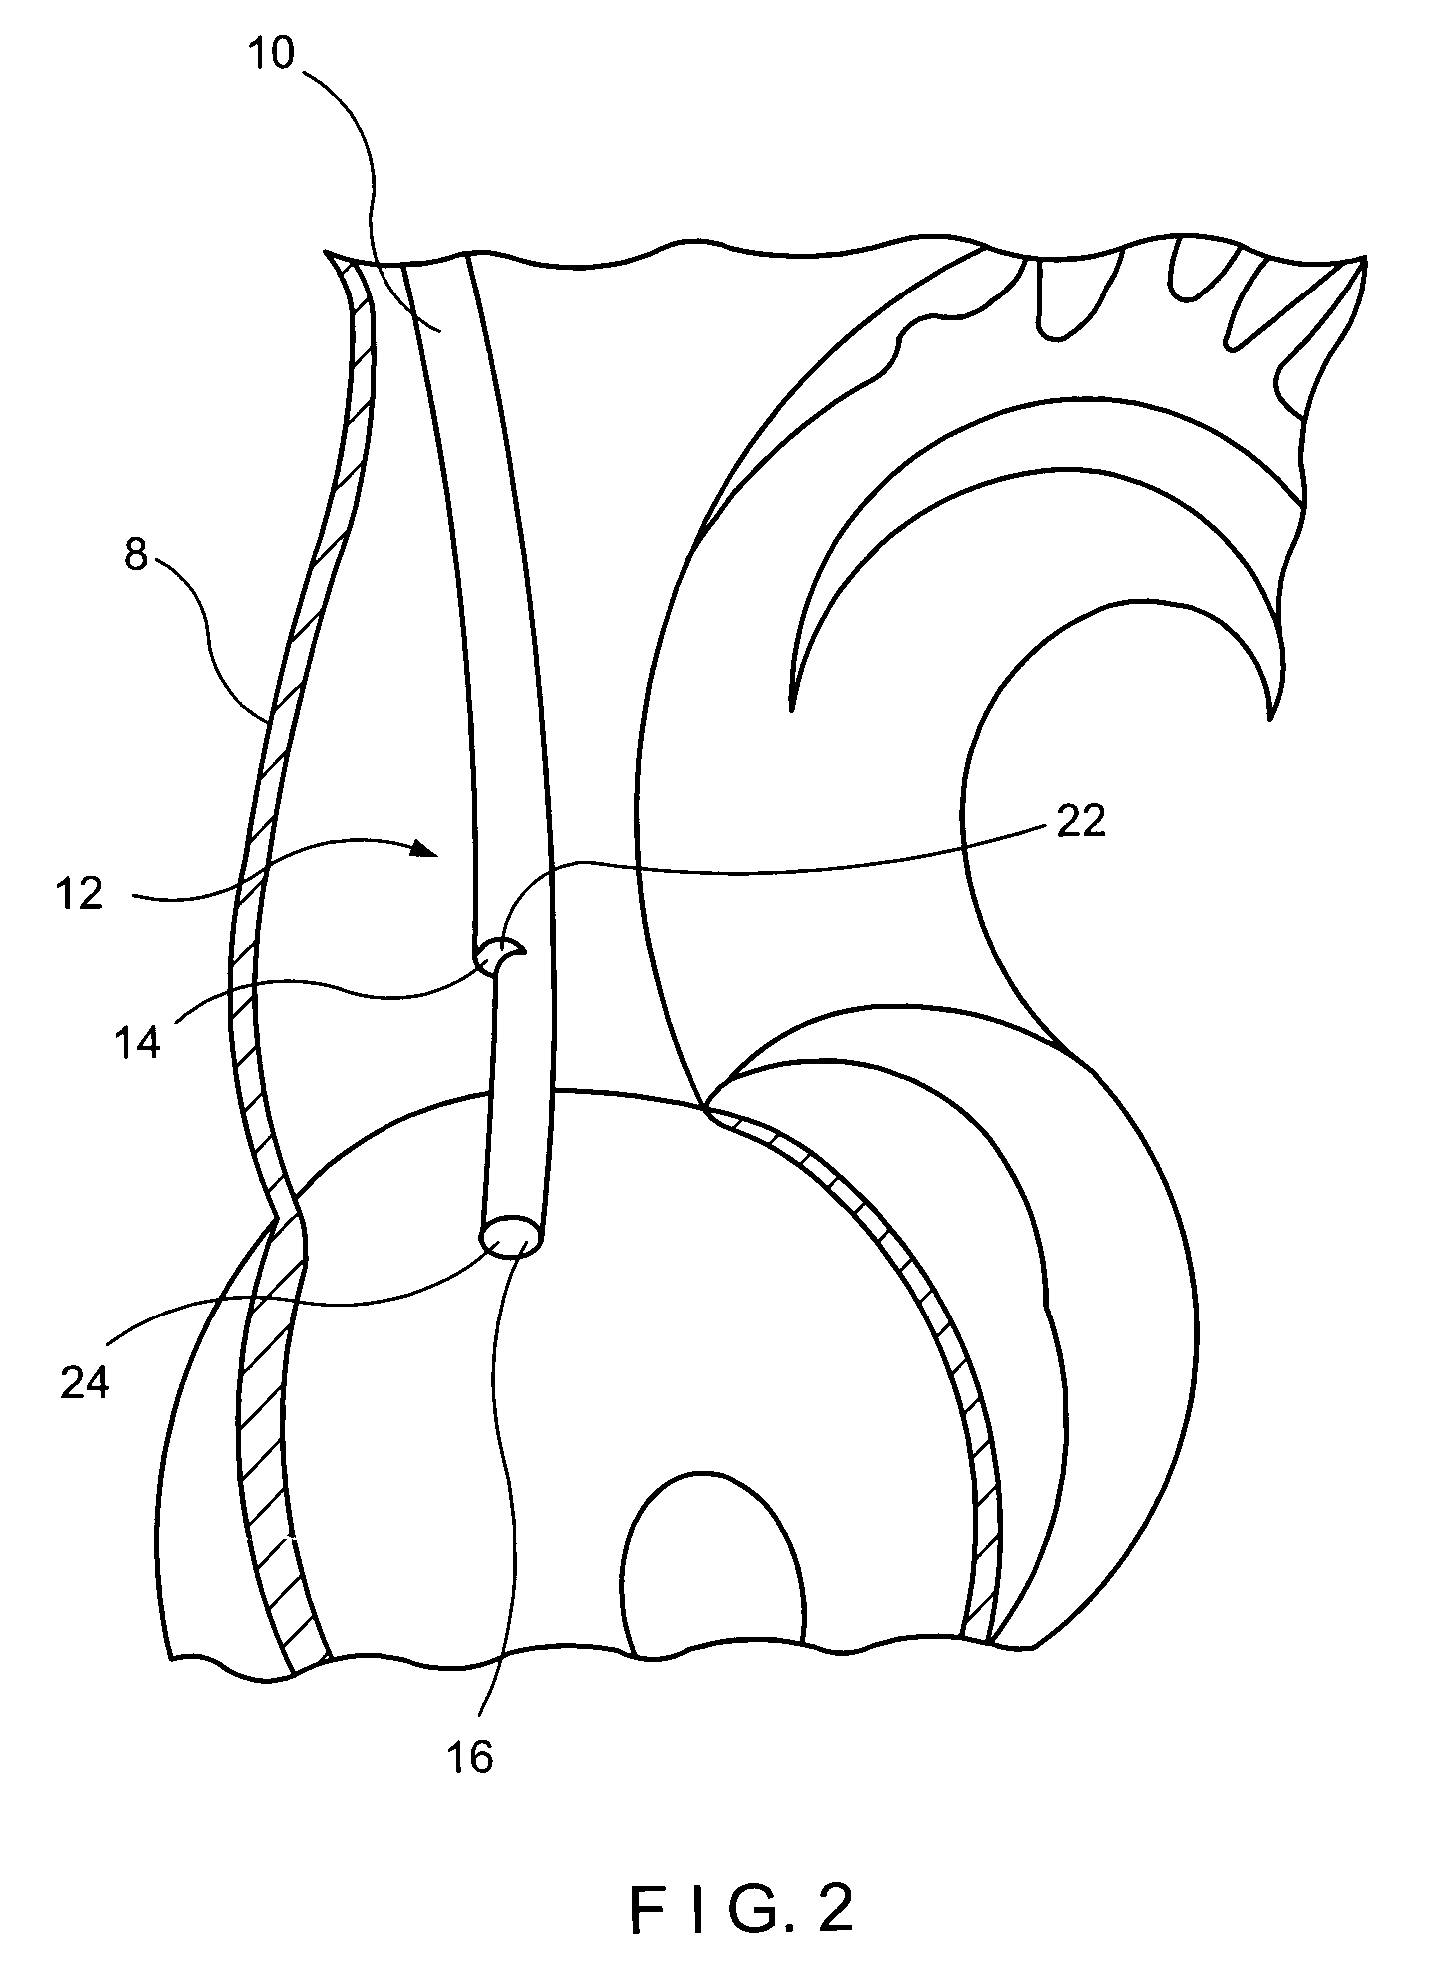 Anti-infective central venous catheter with diffusion barrier layer